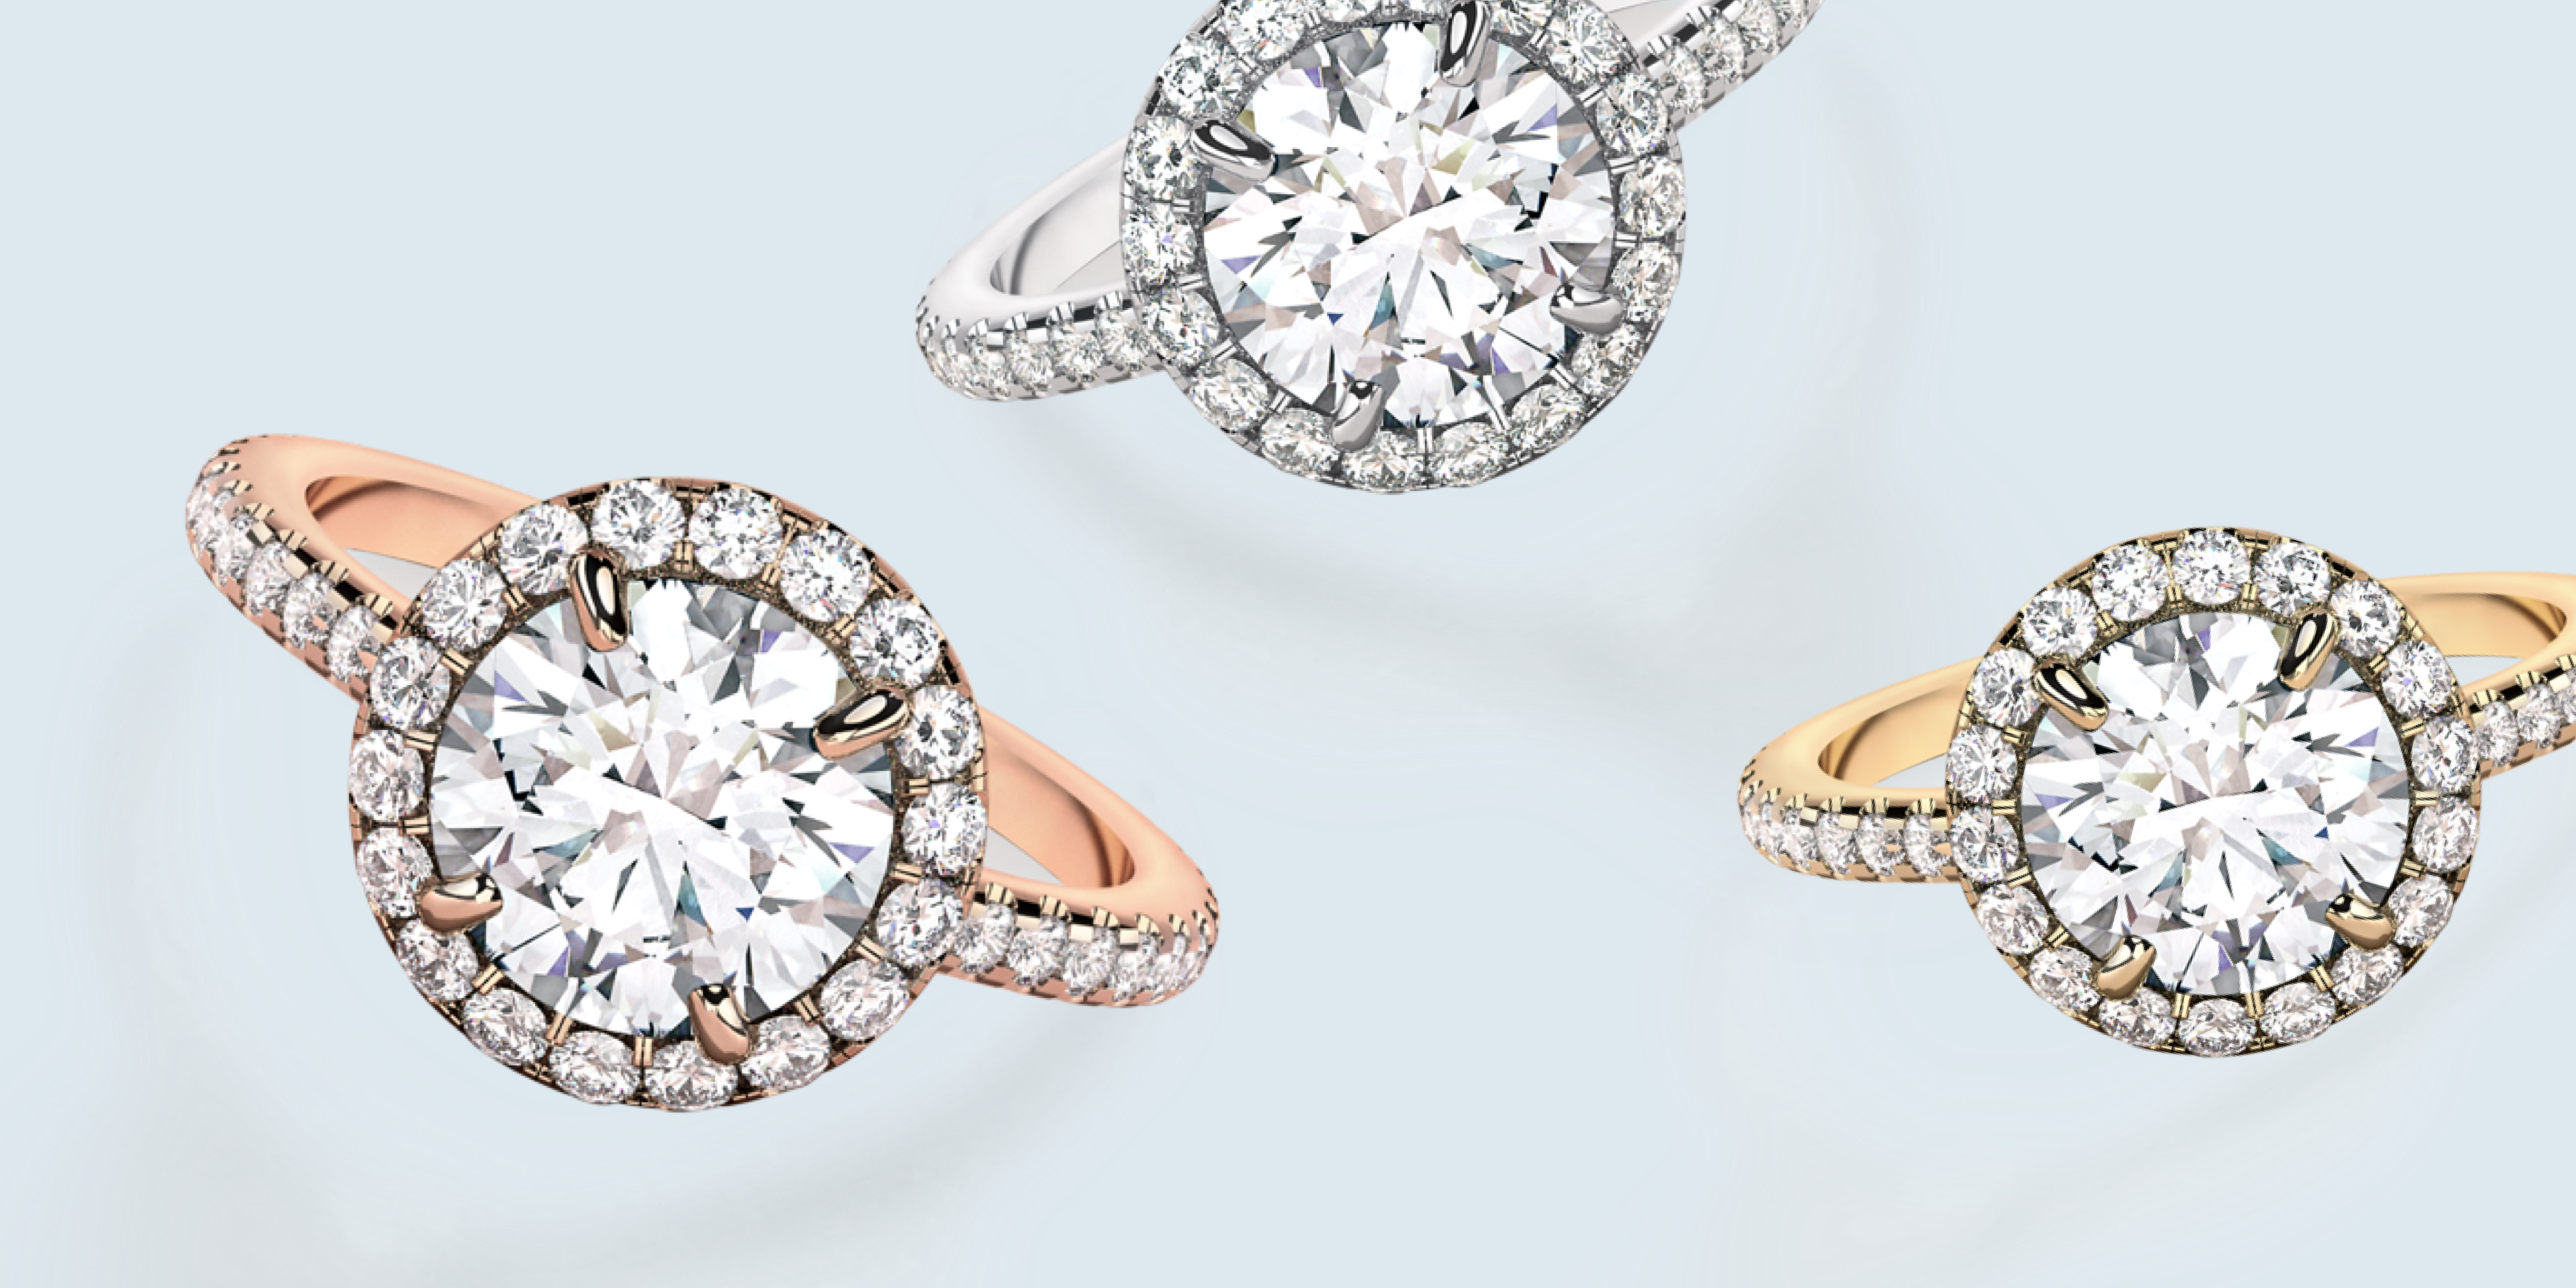 Which metal should you choose for your engagement ring?